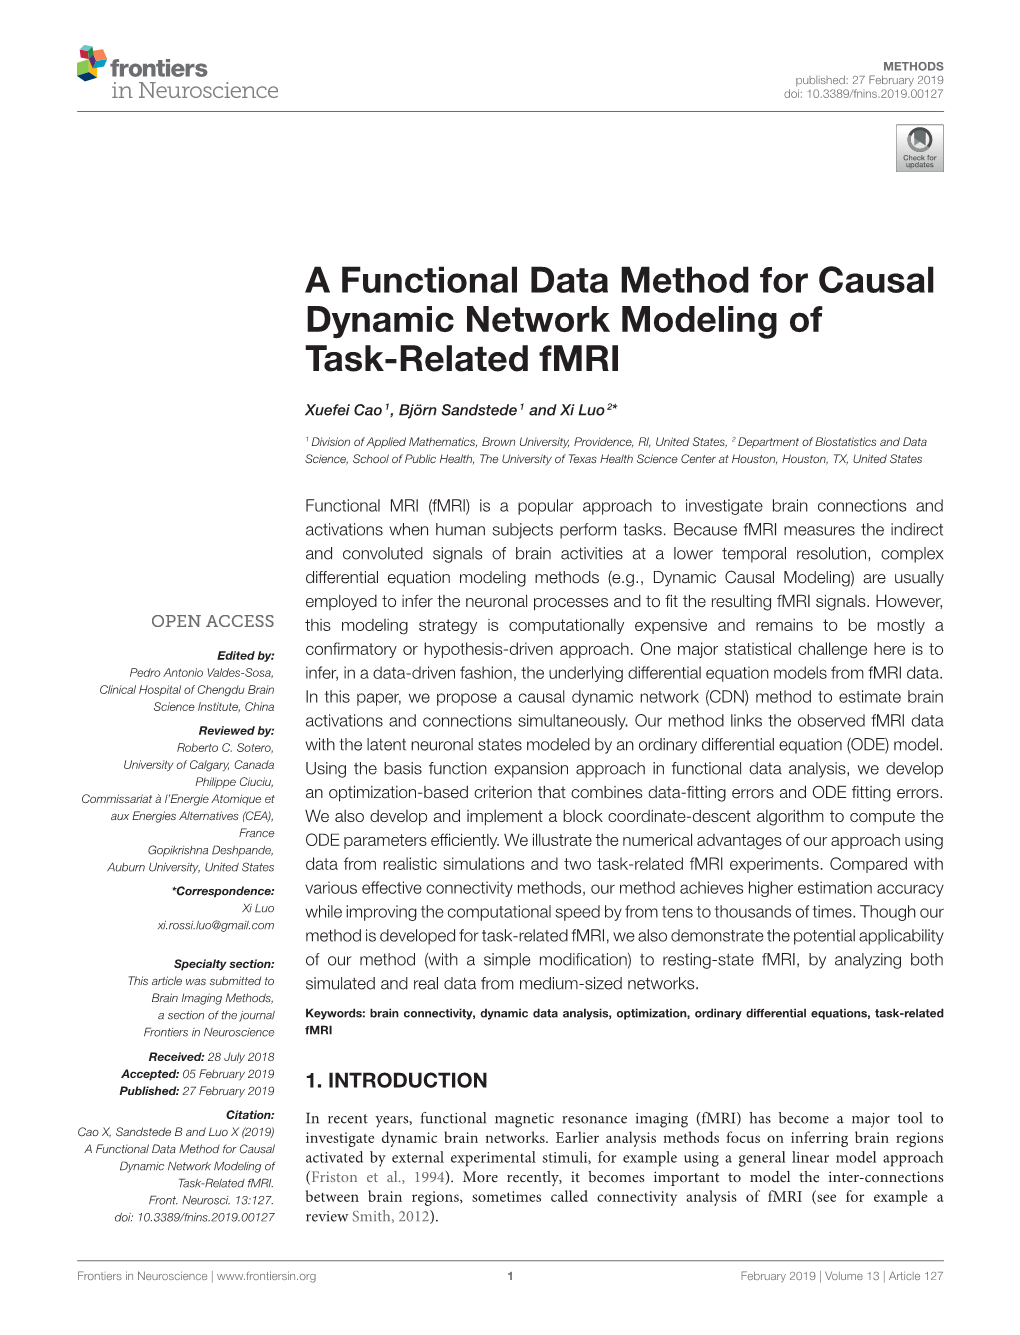 A Functional Data Method for Causal Dynamic Network Modeling of Task-Related Fmri